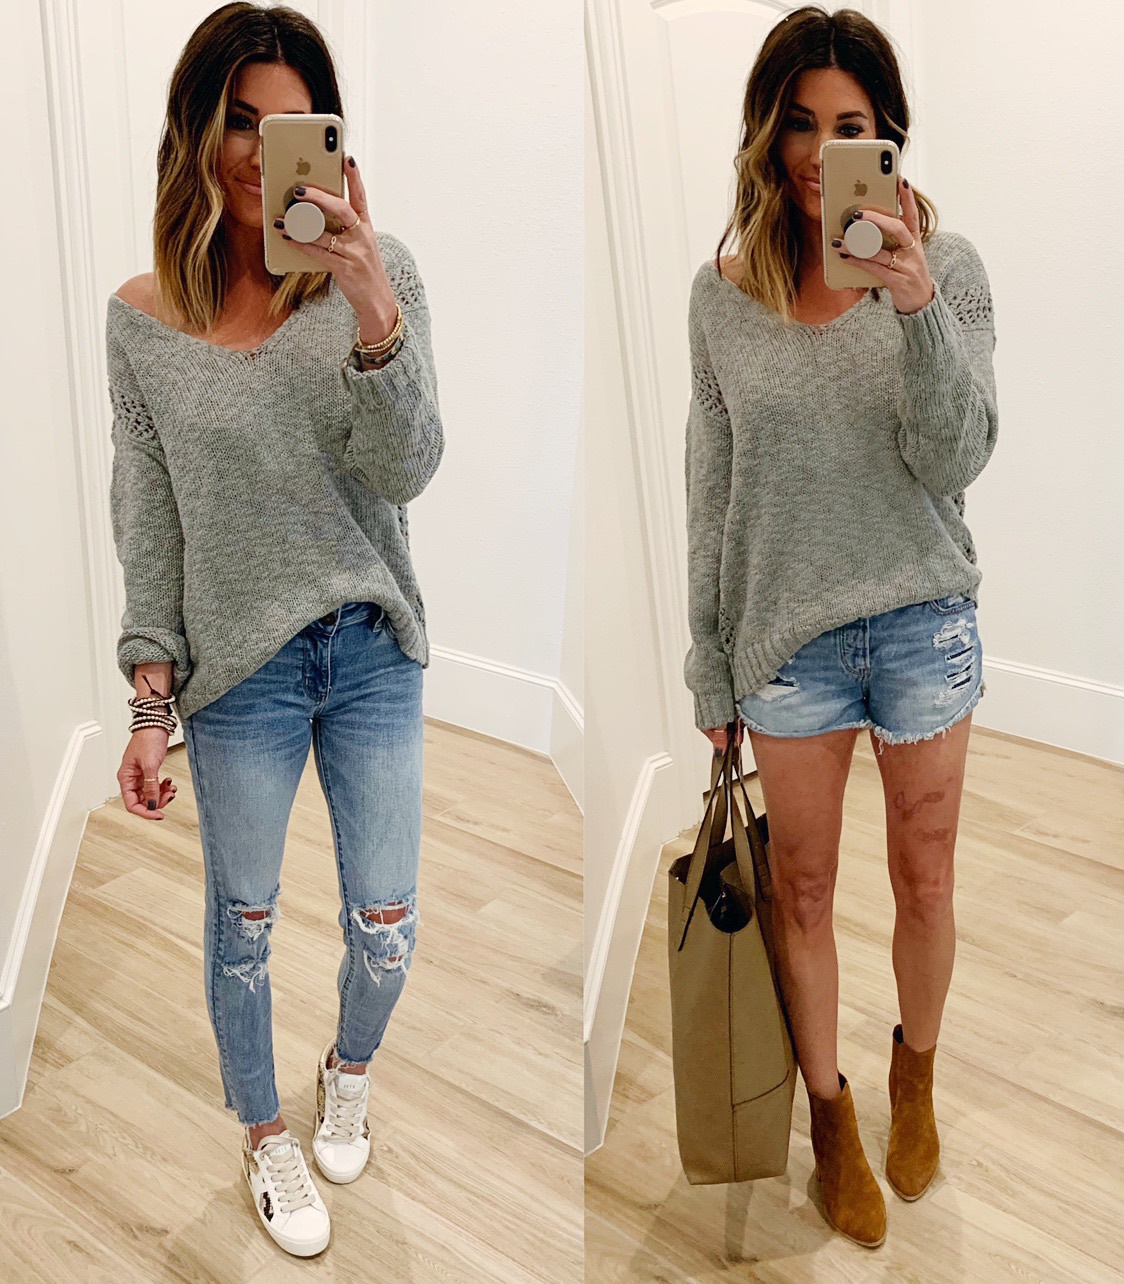 Size 4 & Size 14 Try On the Same Outfits from American Eagle! 